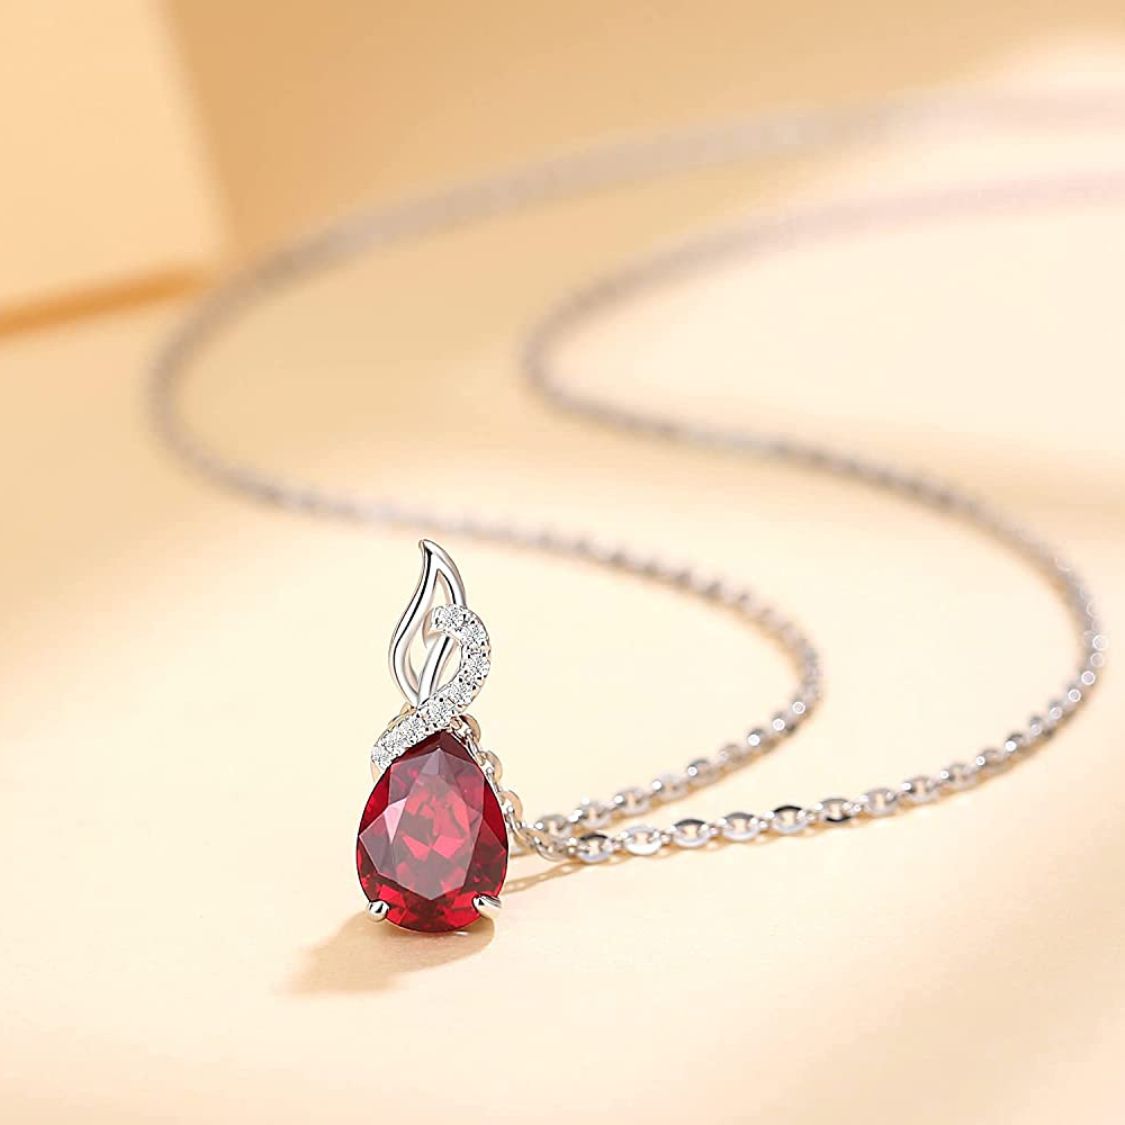 FANCIME "Timeless Heart" Ruby July Gemstone Sterling Silver Necklace Detail